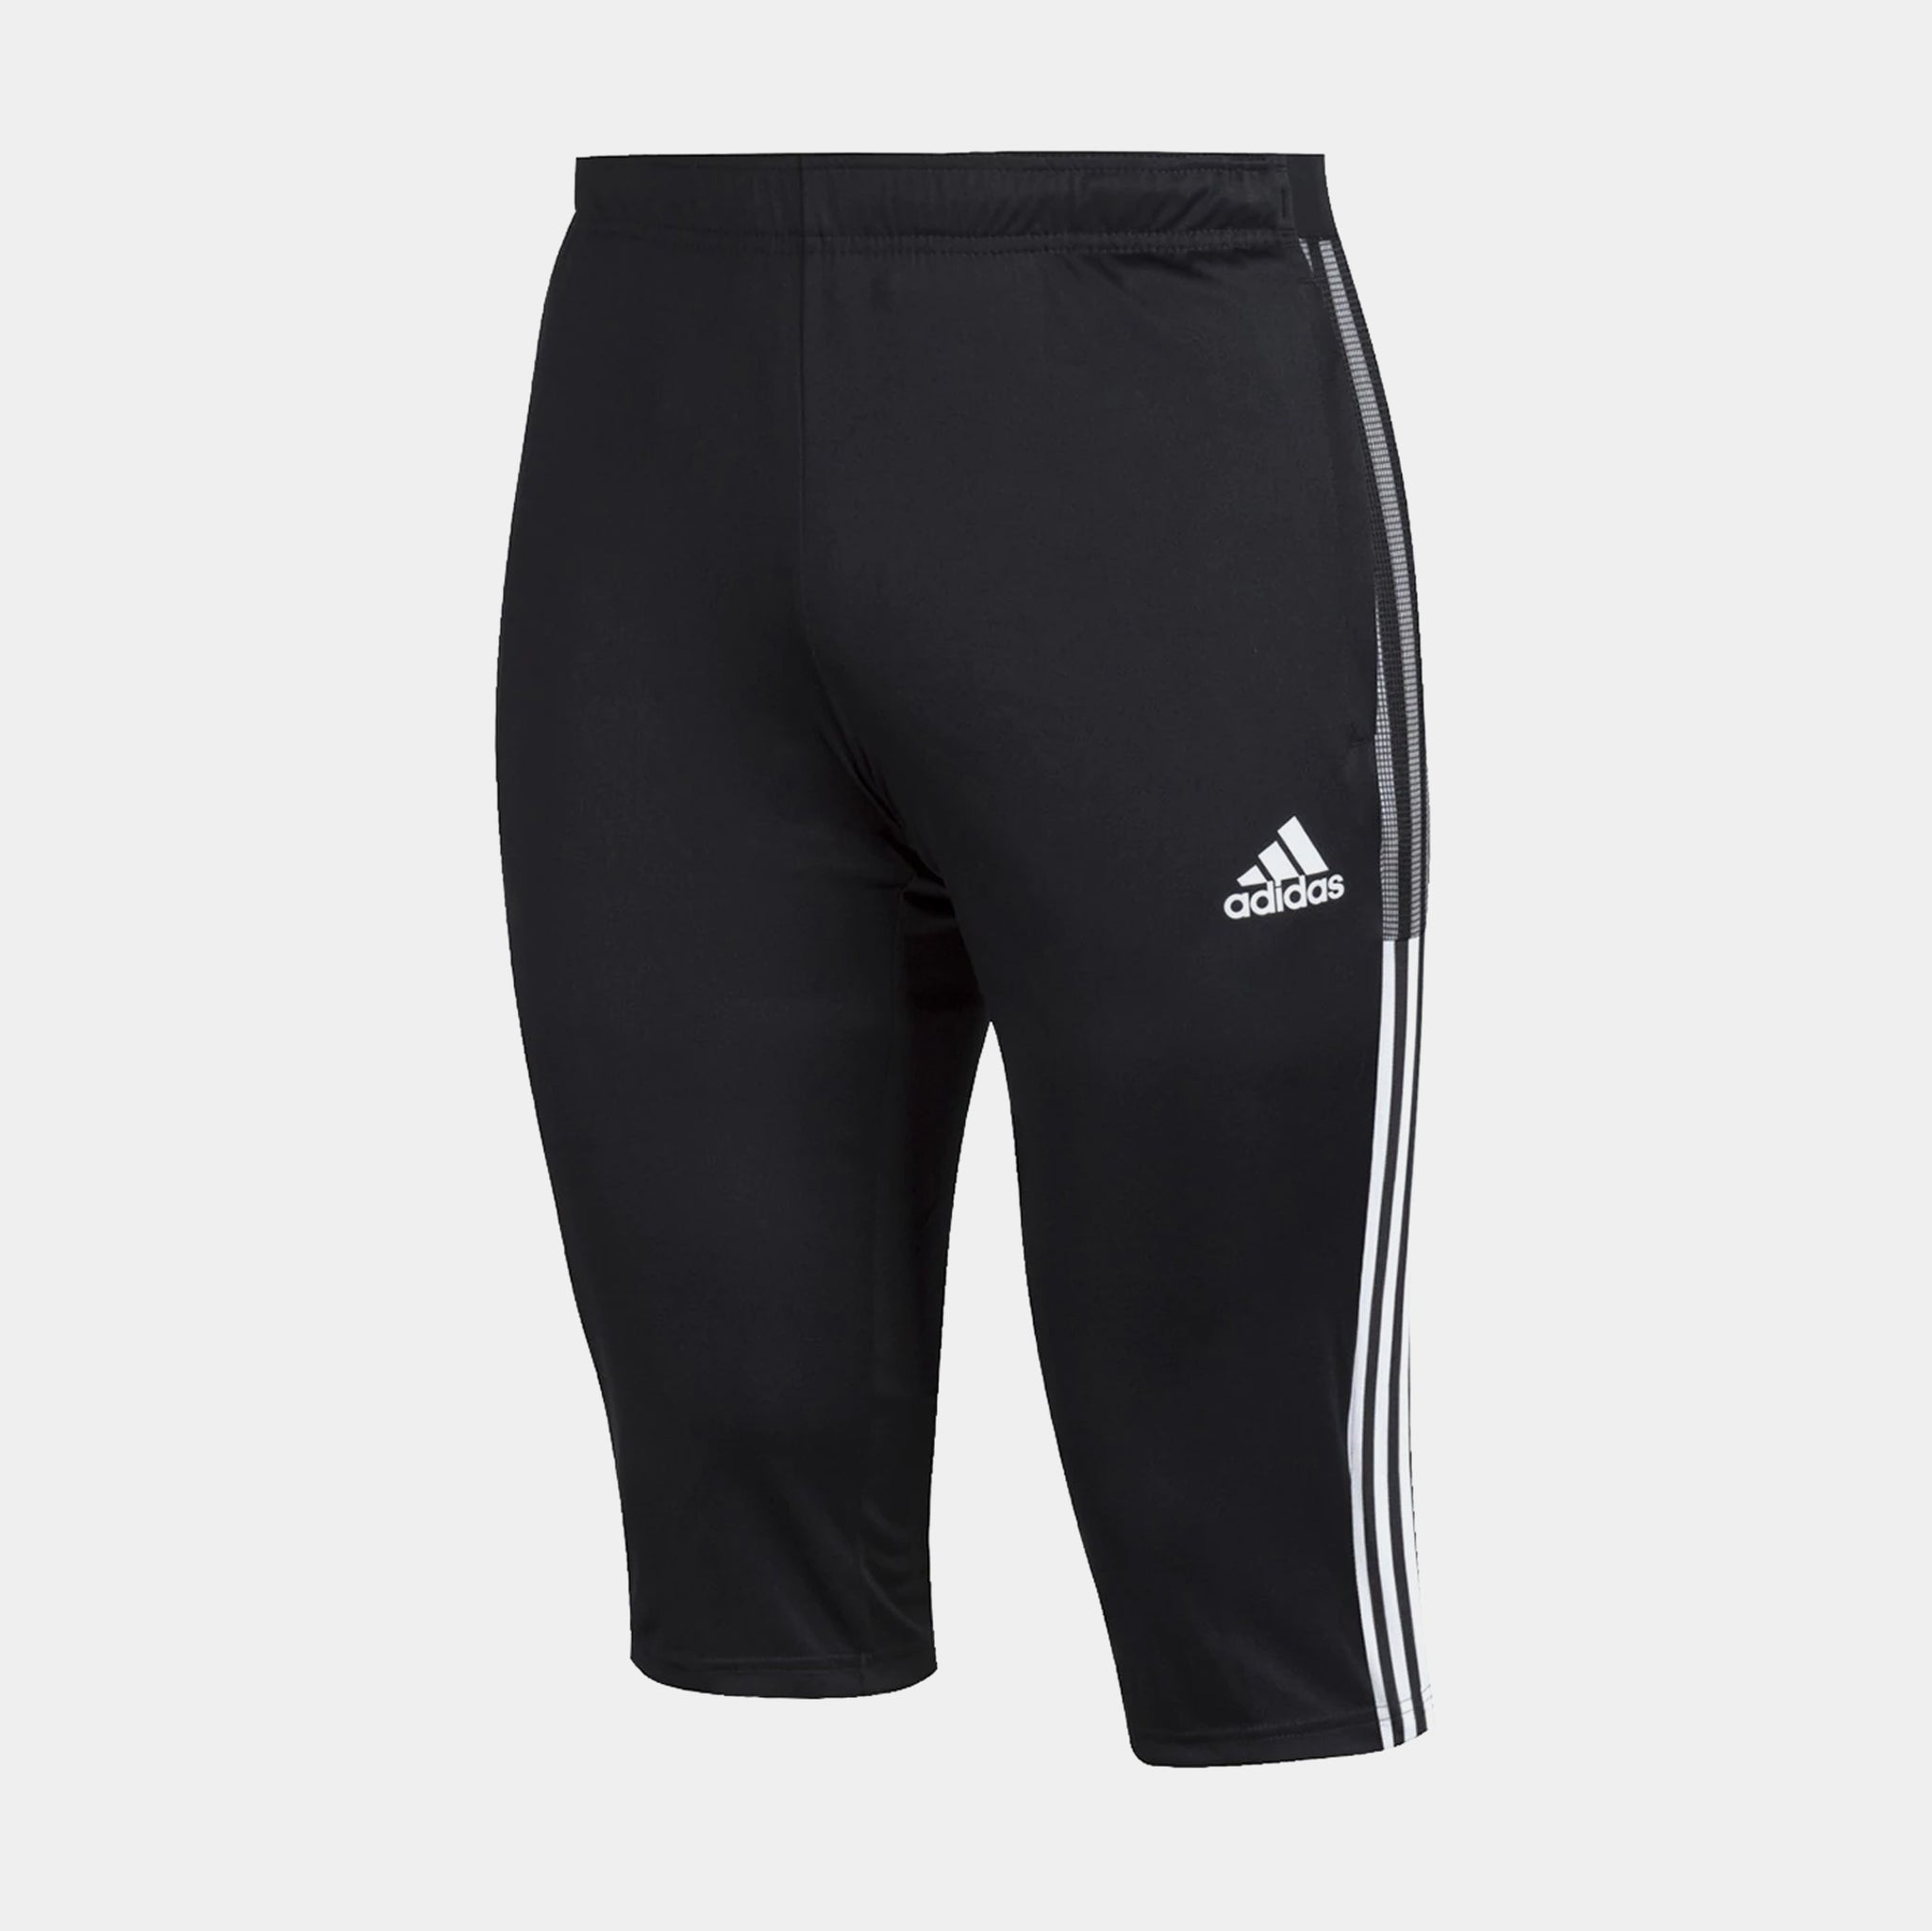 Adidas Germany Home Short World Cup 2018/Soccer Germany Shorts - at Amazon  Men's Clothing store